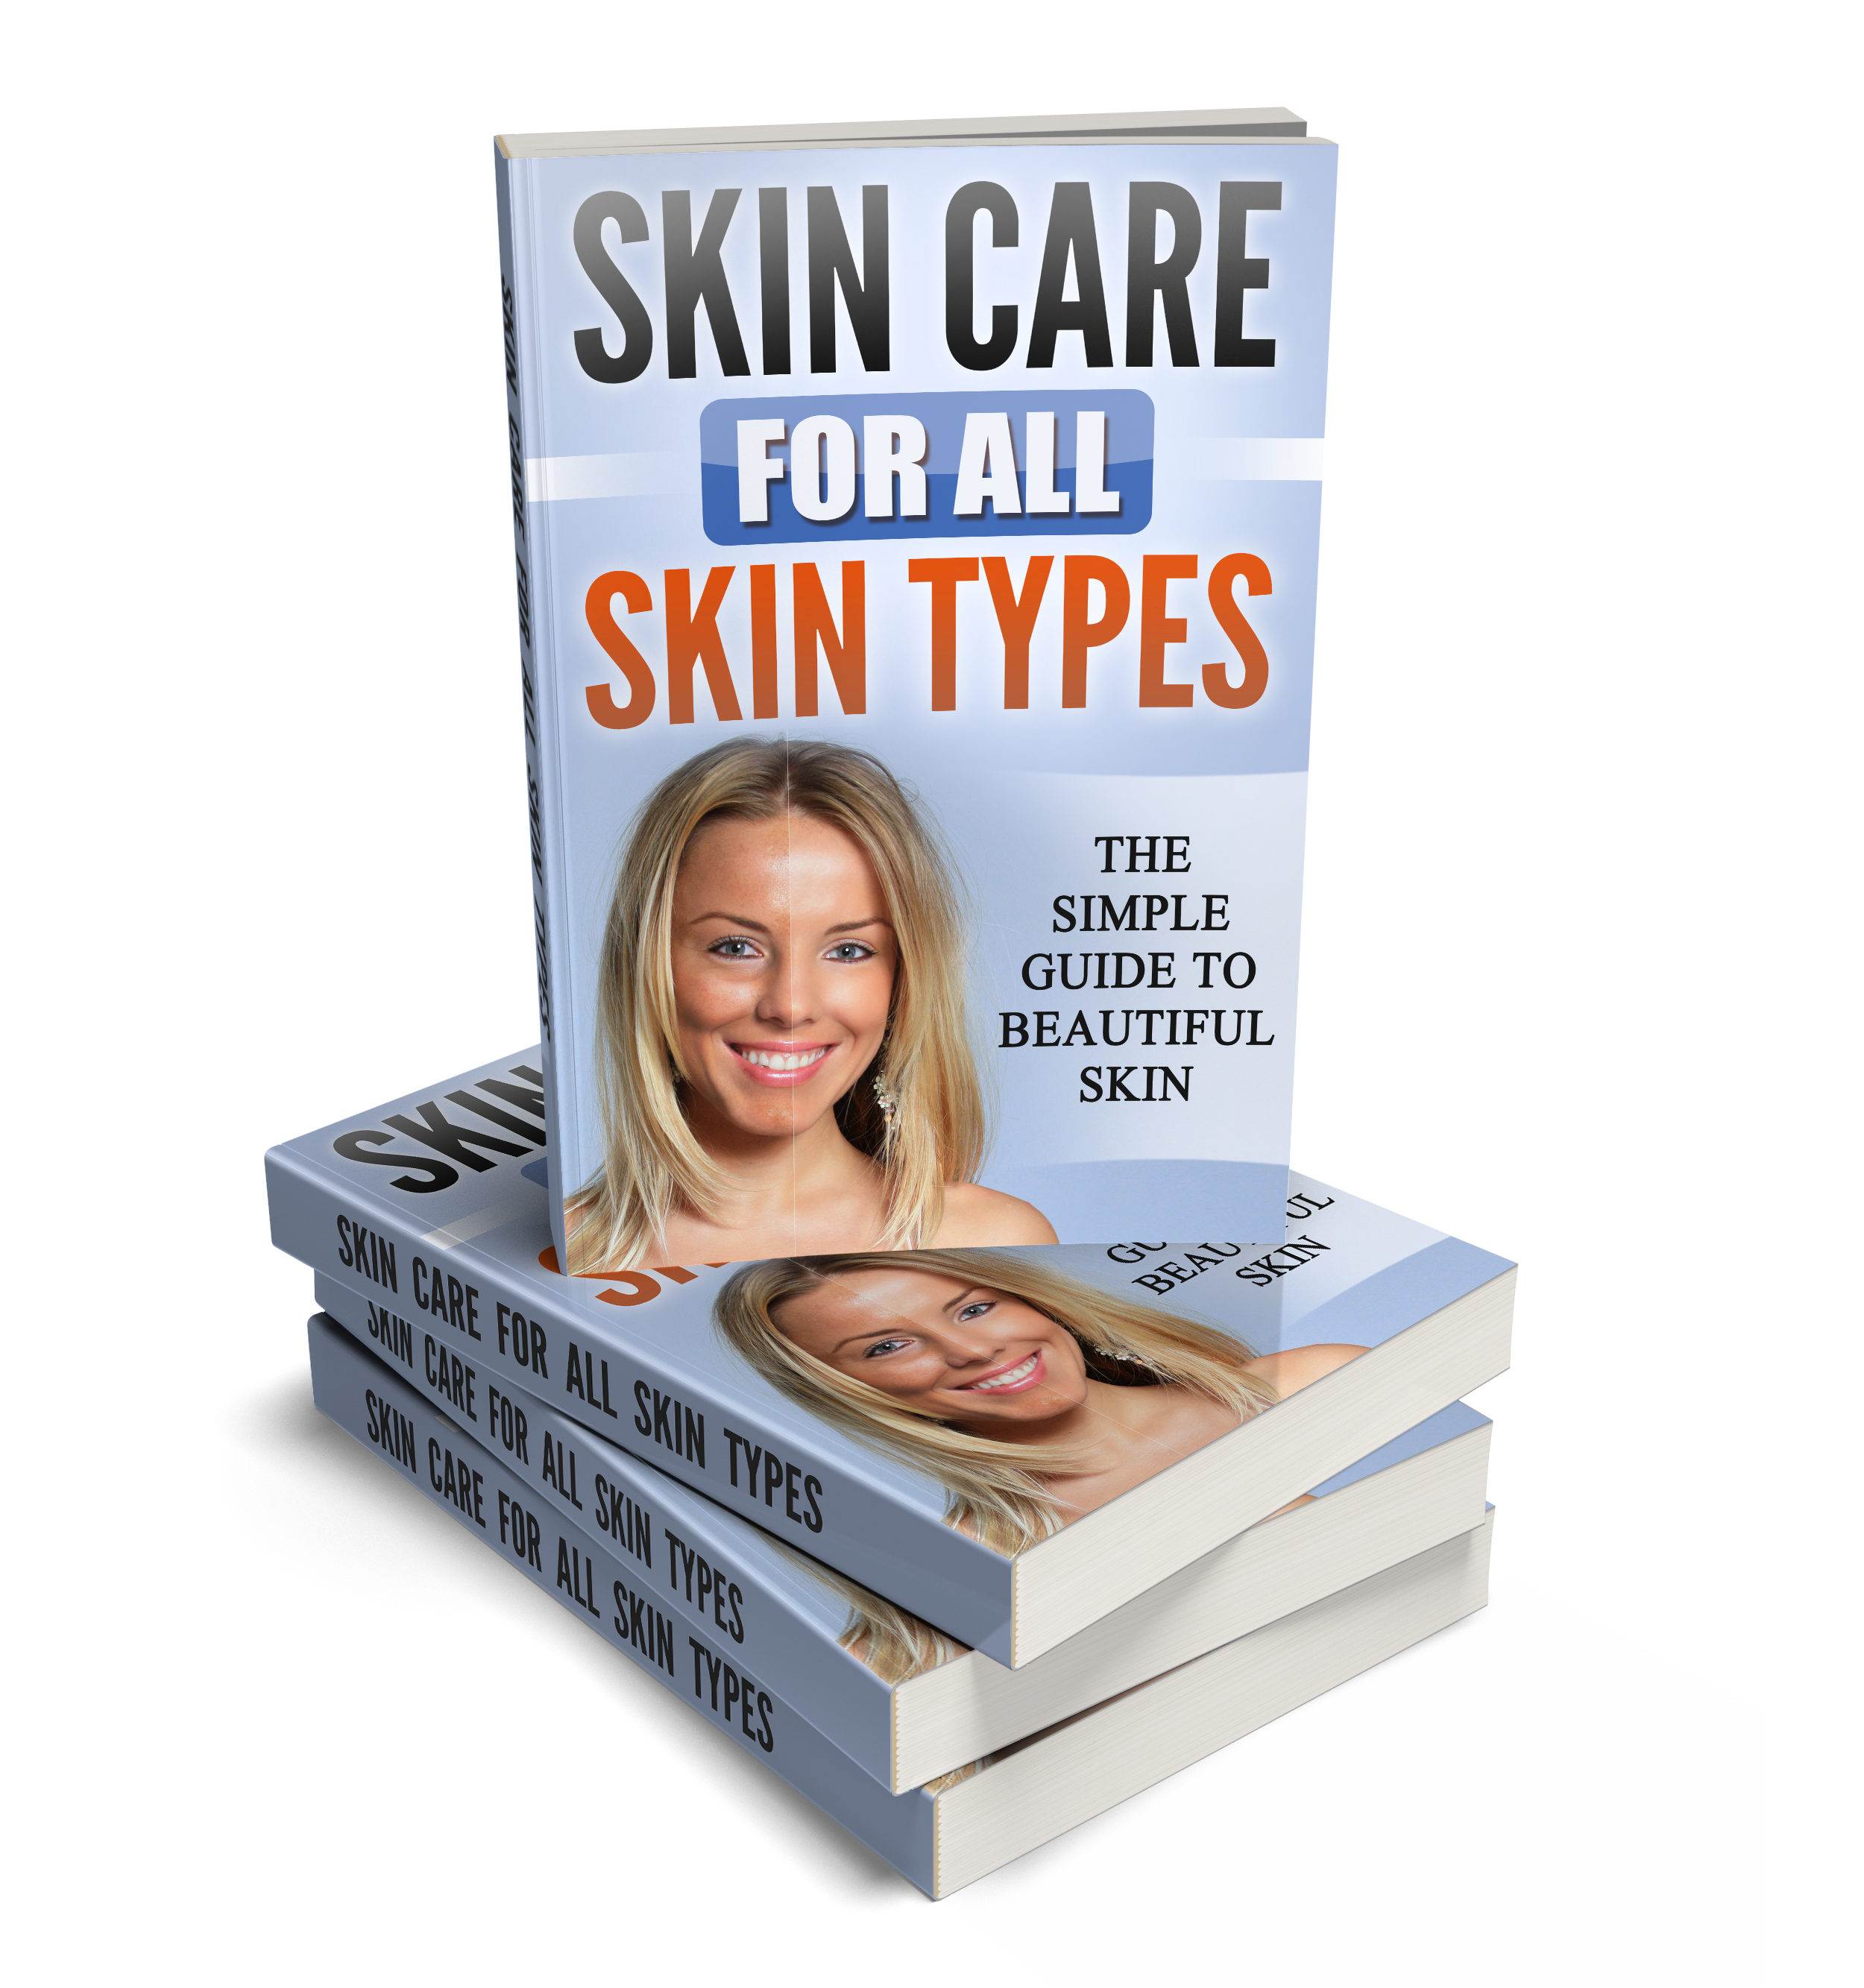 Skin Care for All Skin Types